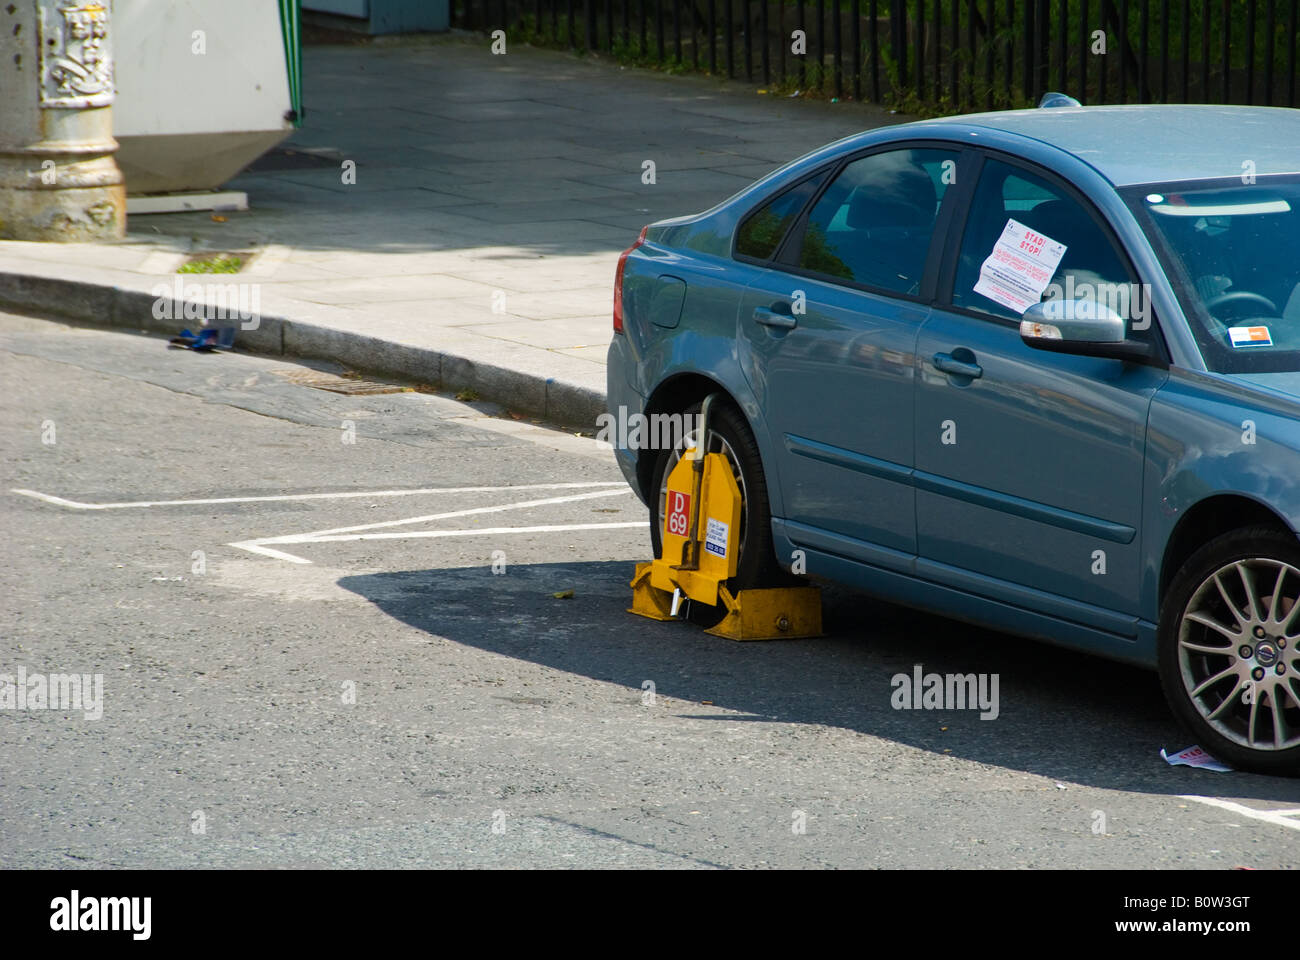 Wheel Clamp on an Illegally Parked Car Stock Photo